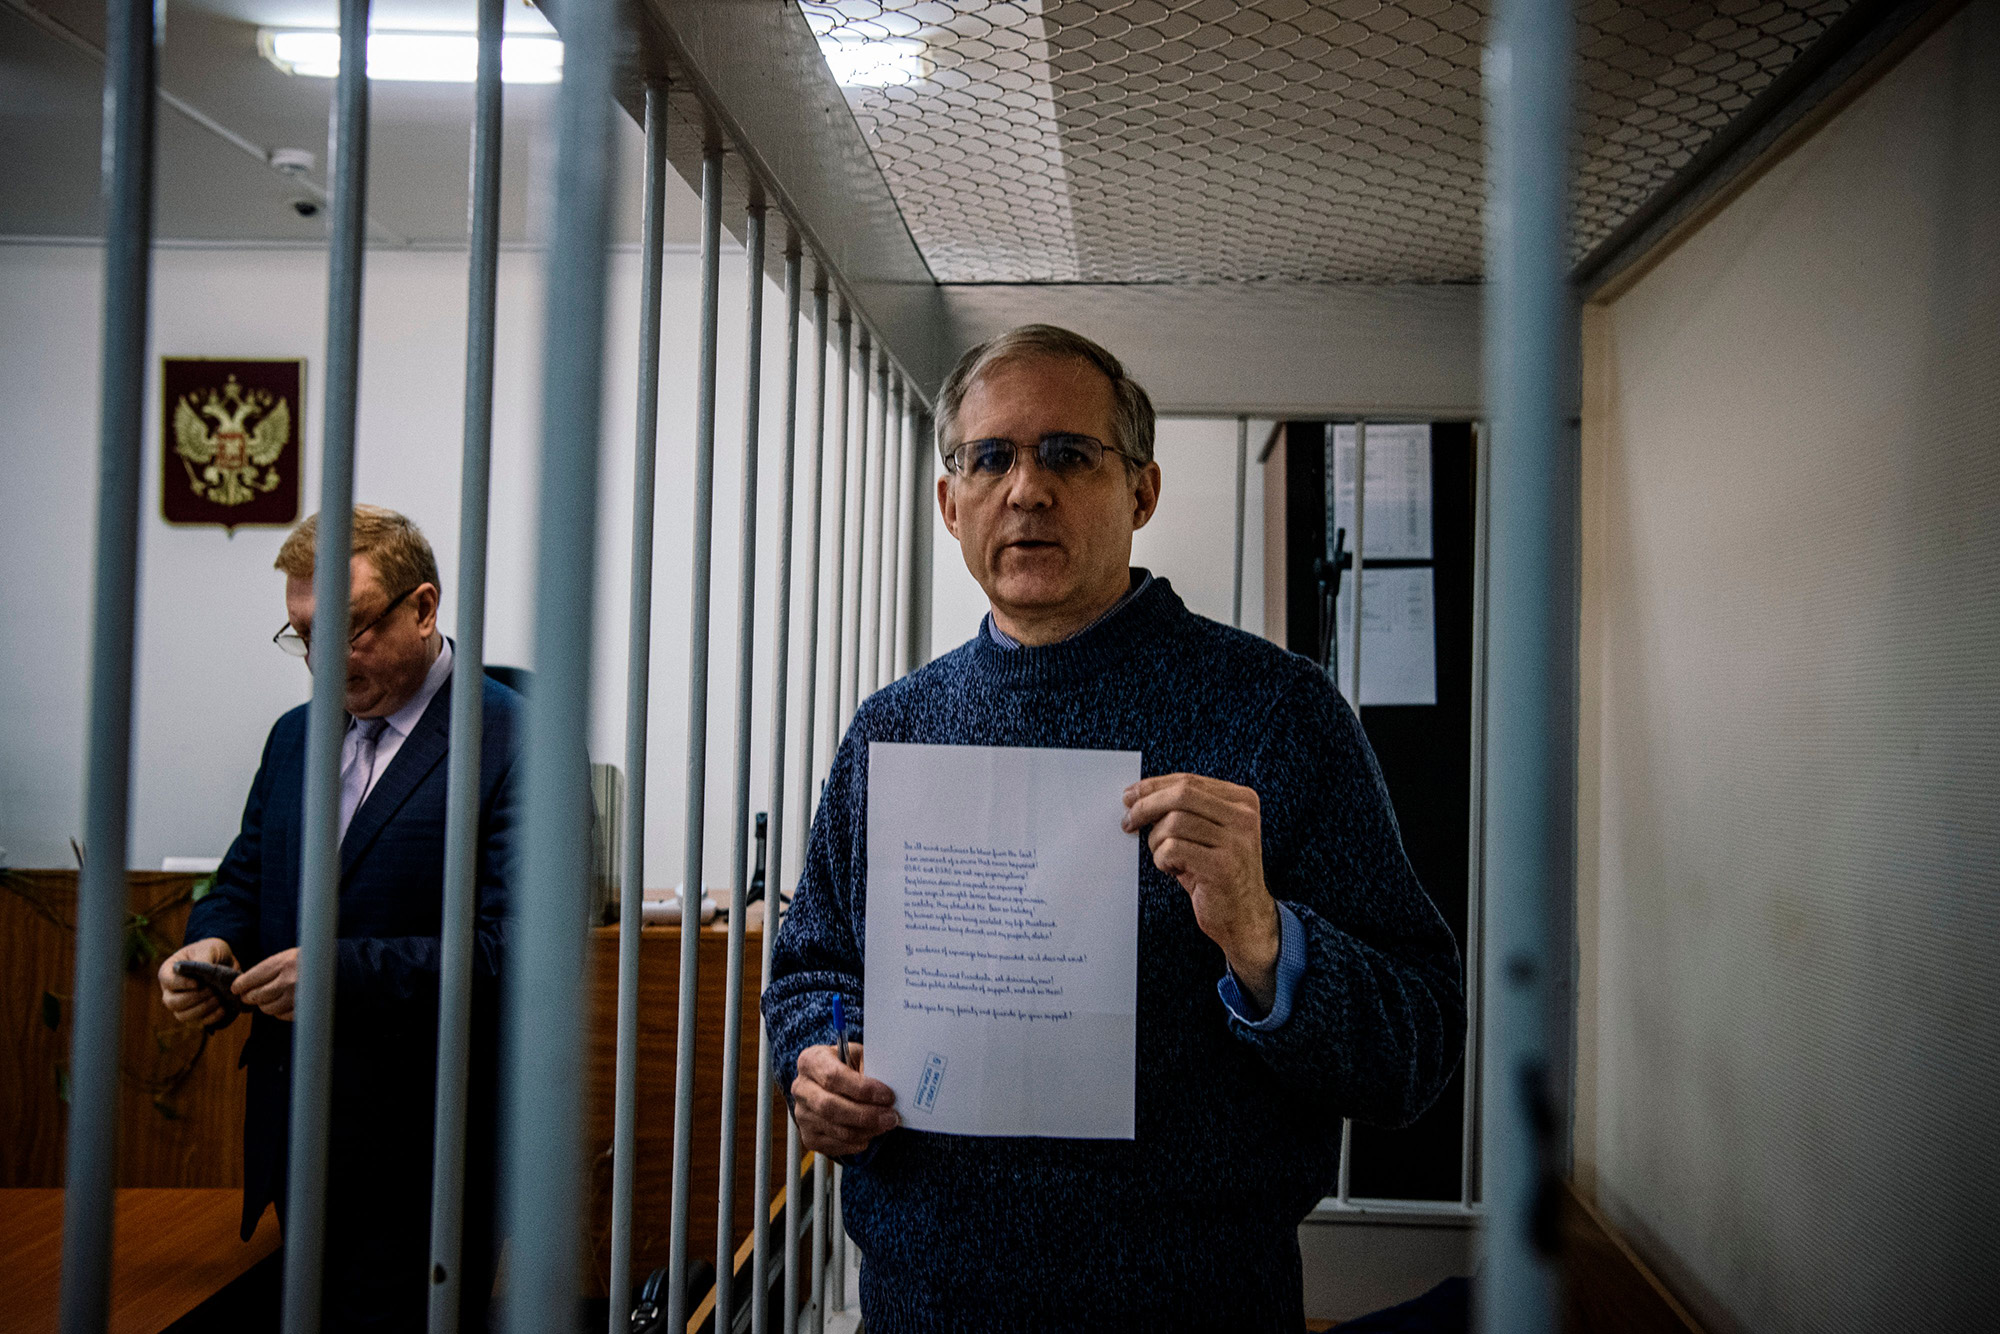 Former US Marine Paul Whelan, detained in Russia on espionage charges, holds a message before a hearing at the Lefortovo Court in Moscow, on October 24, 2019.